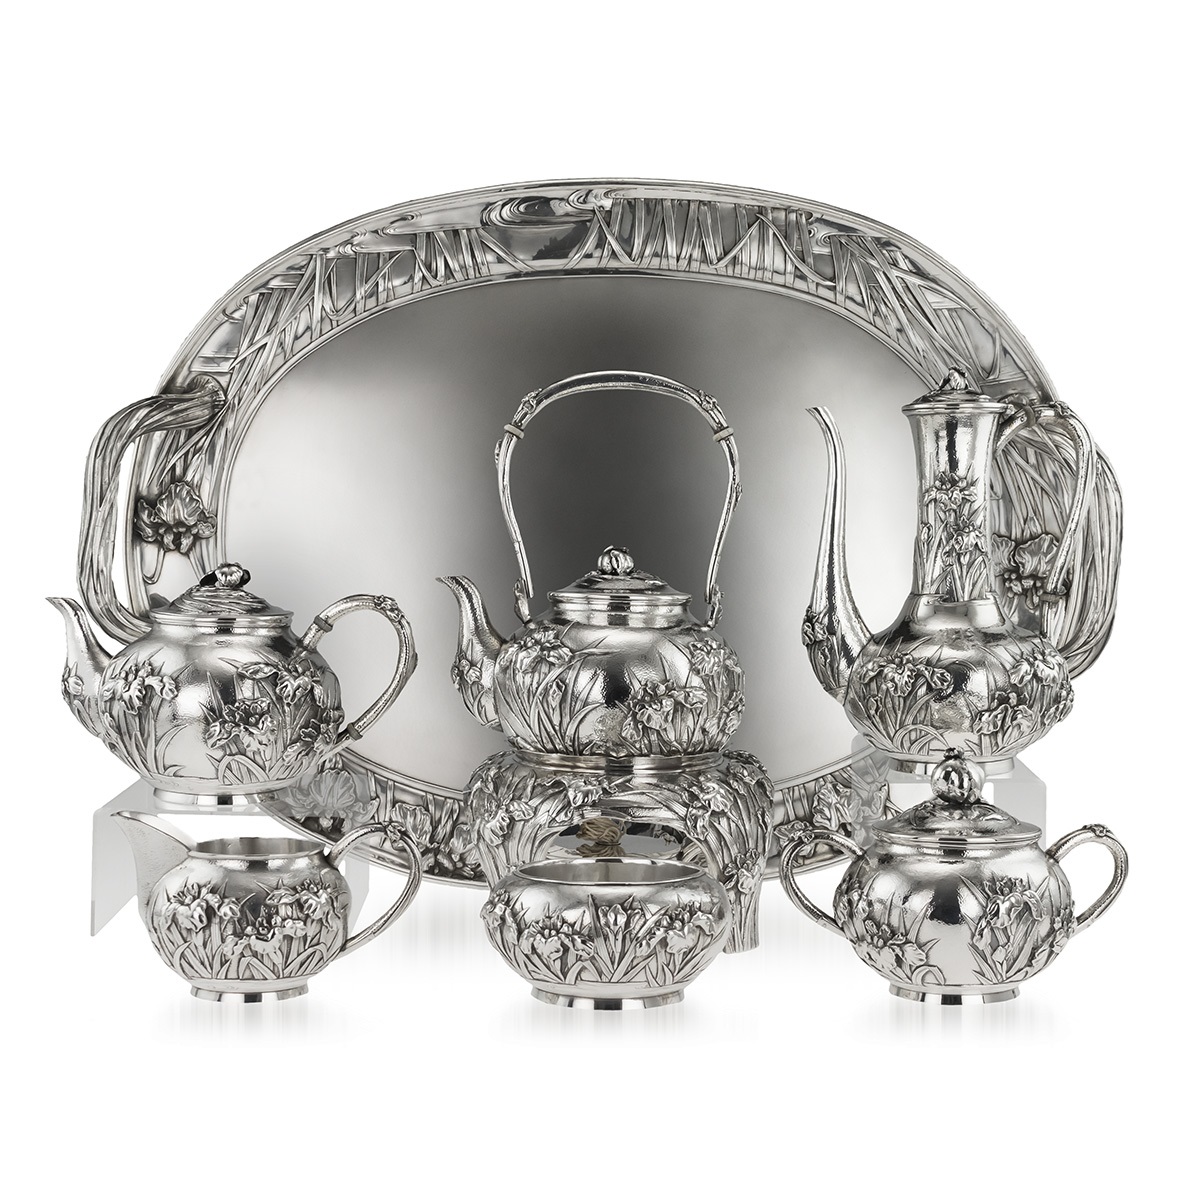 AN EXCEPTIONAL EARLY 20TH CENTURY JAPANESE SILVER TEA & COFFEE SERVICE ON TRAY C. 1900